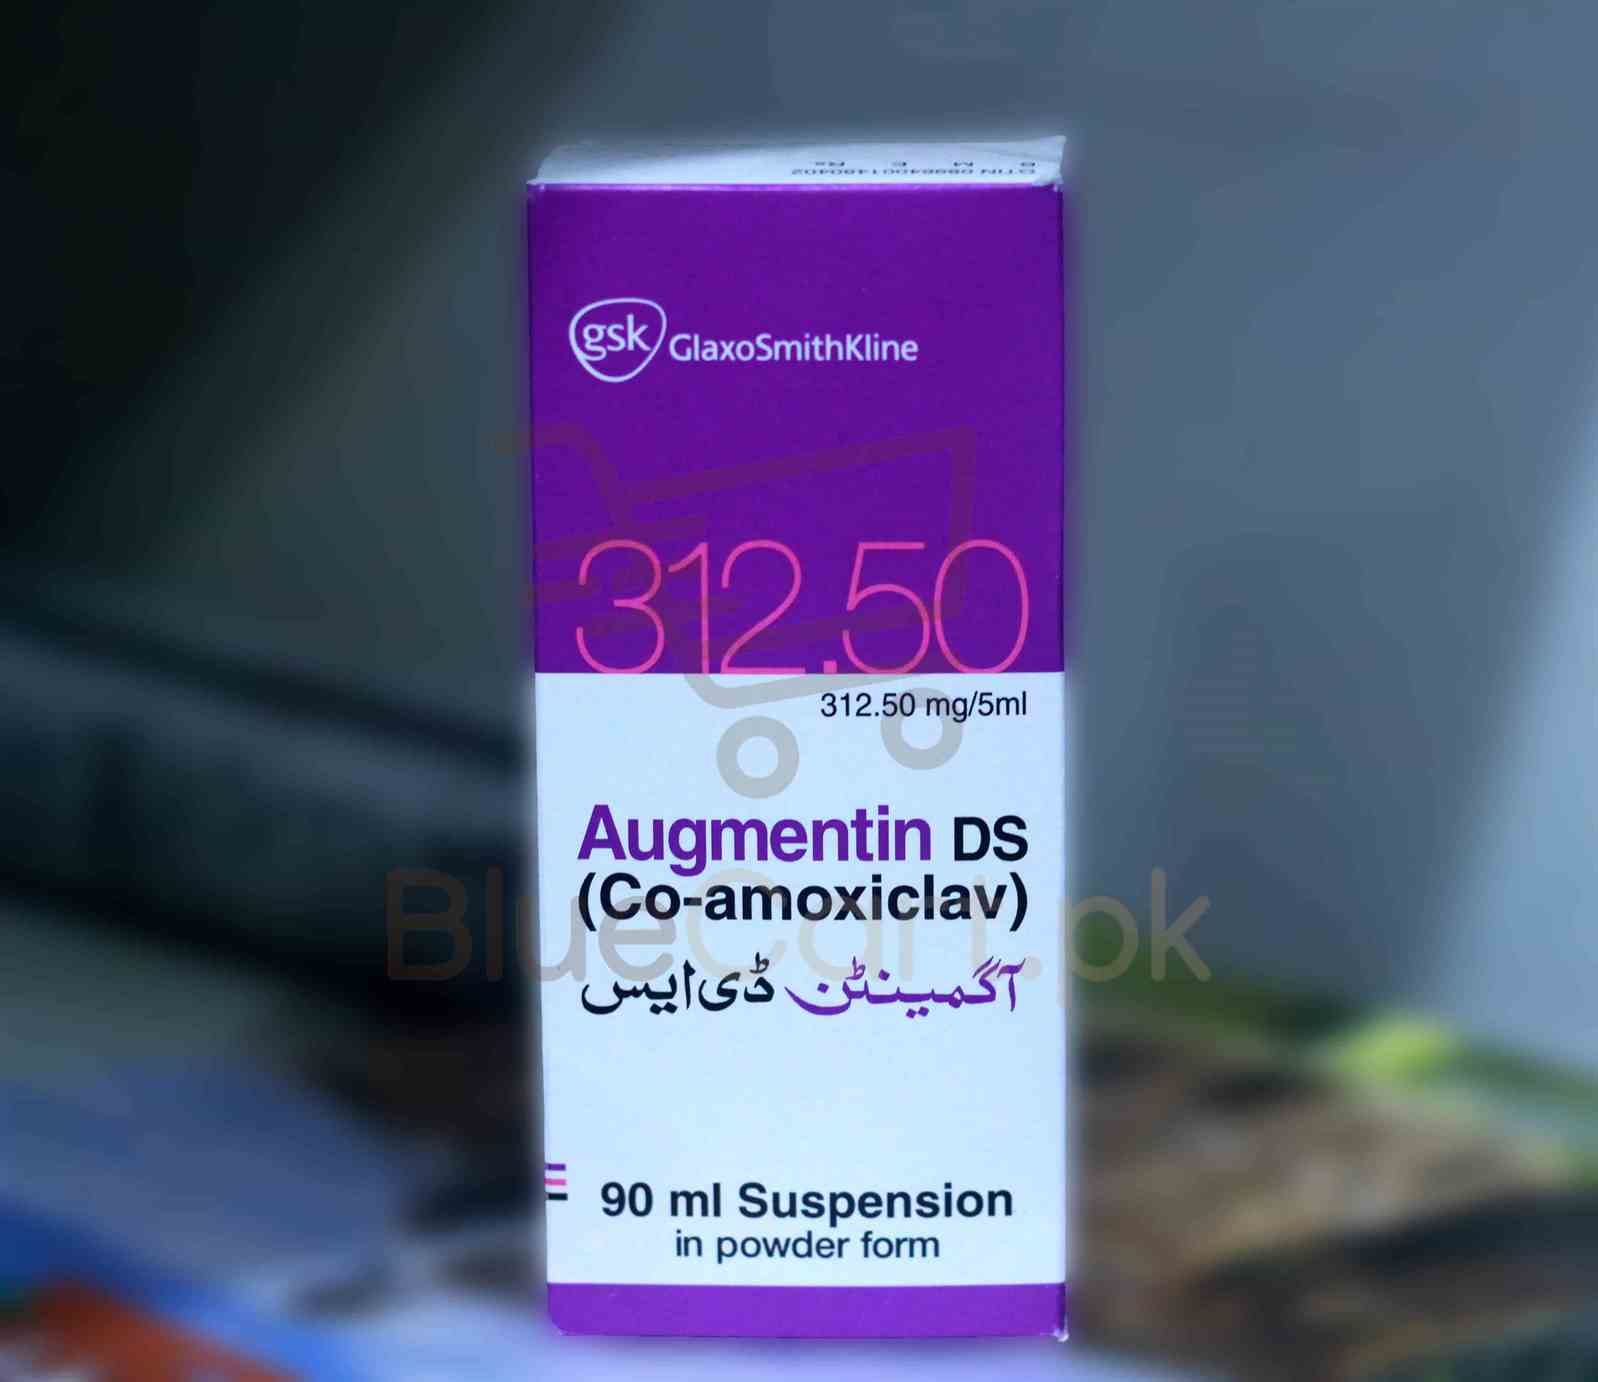 Augmentin Ds Syrup 312.50mg